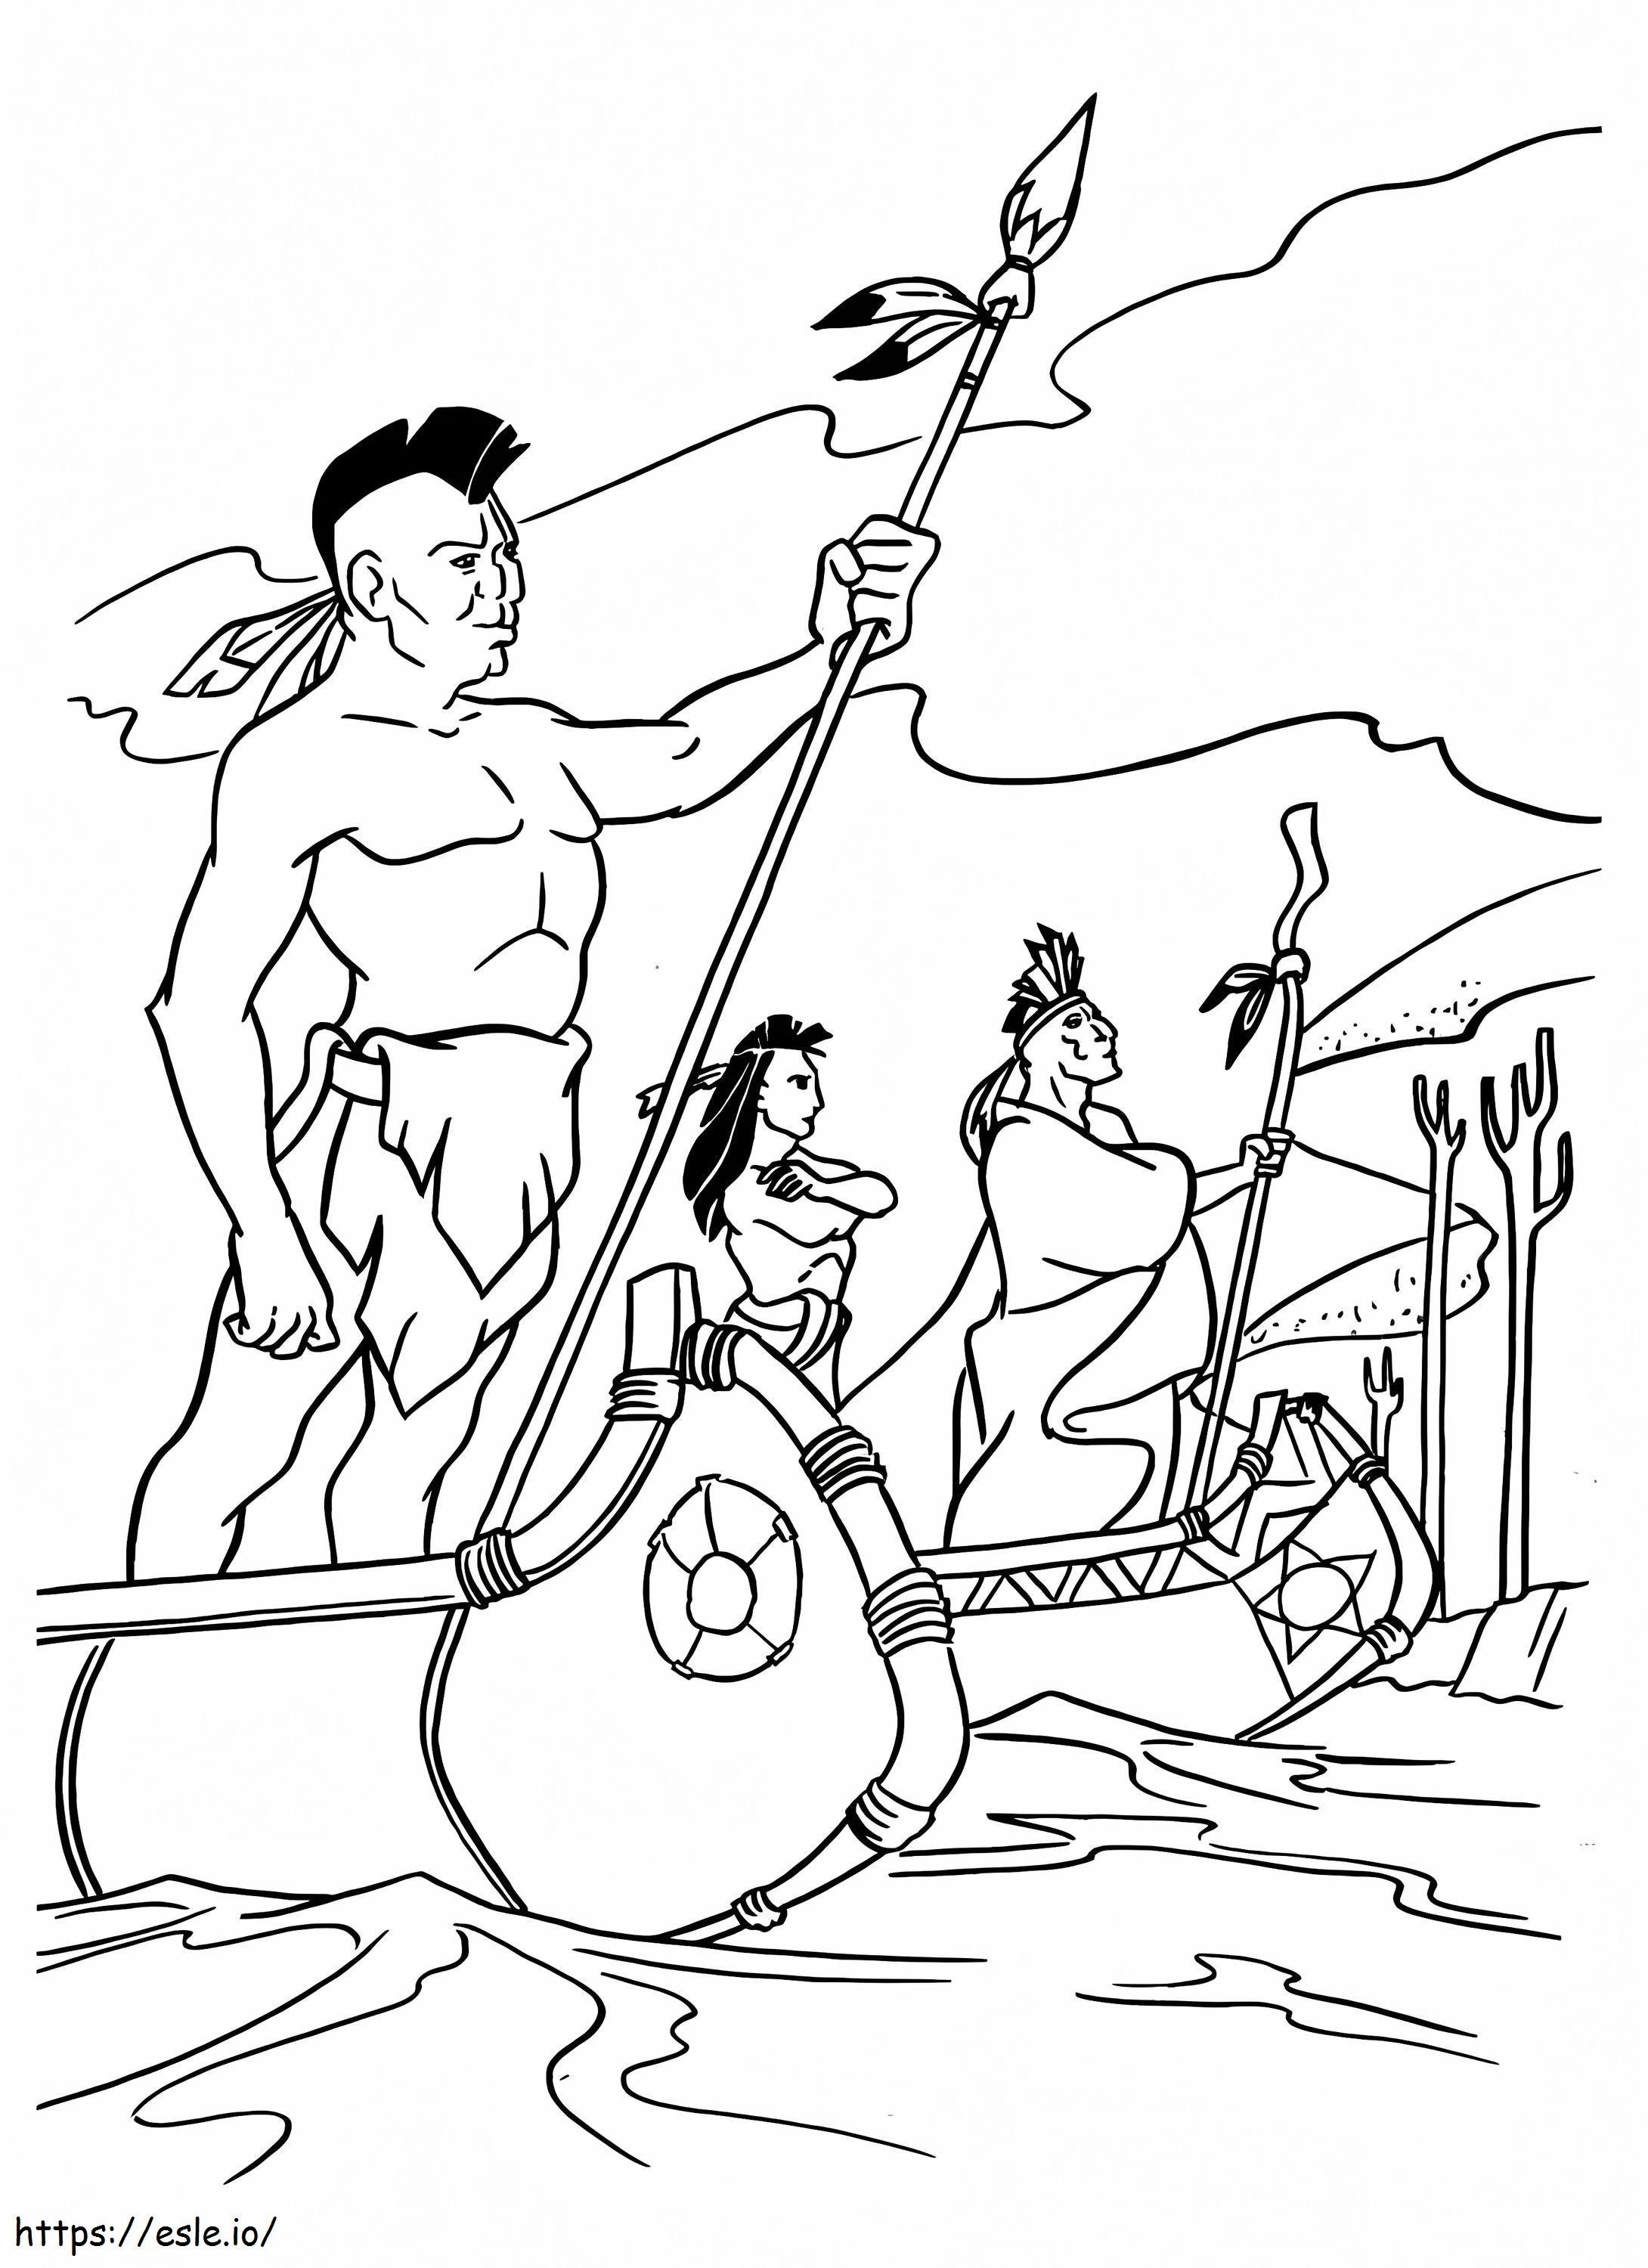 Native Americans Are Coming coloring page